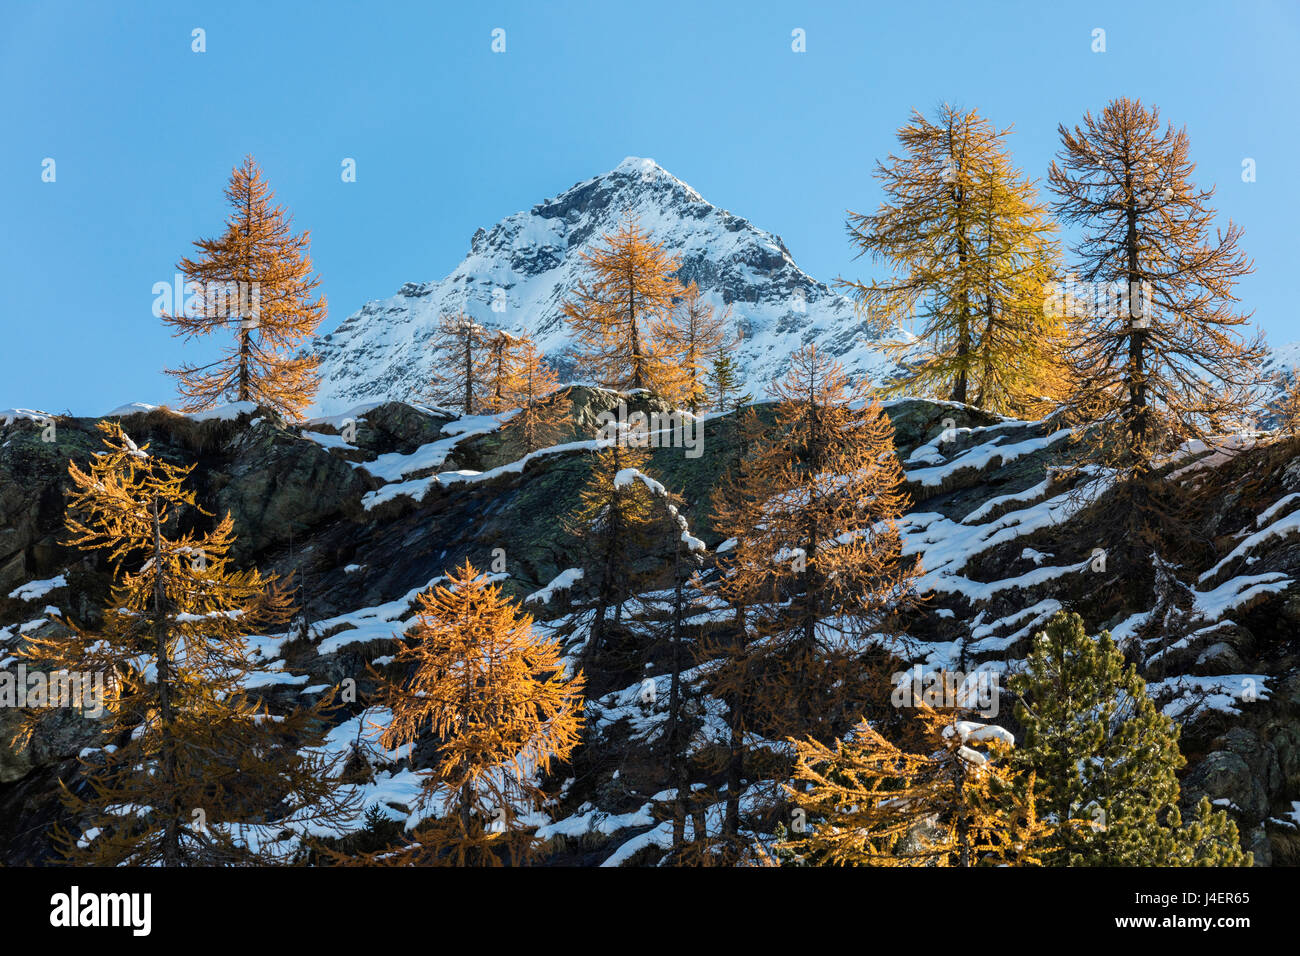 Red larches frame the snowy peaks, Malenco Valley, Province of Sondrio, Valtellina, Lombardy, Italy, Europe Stock Photo